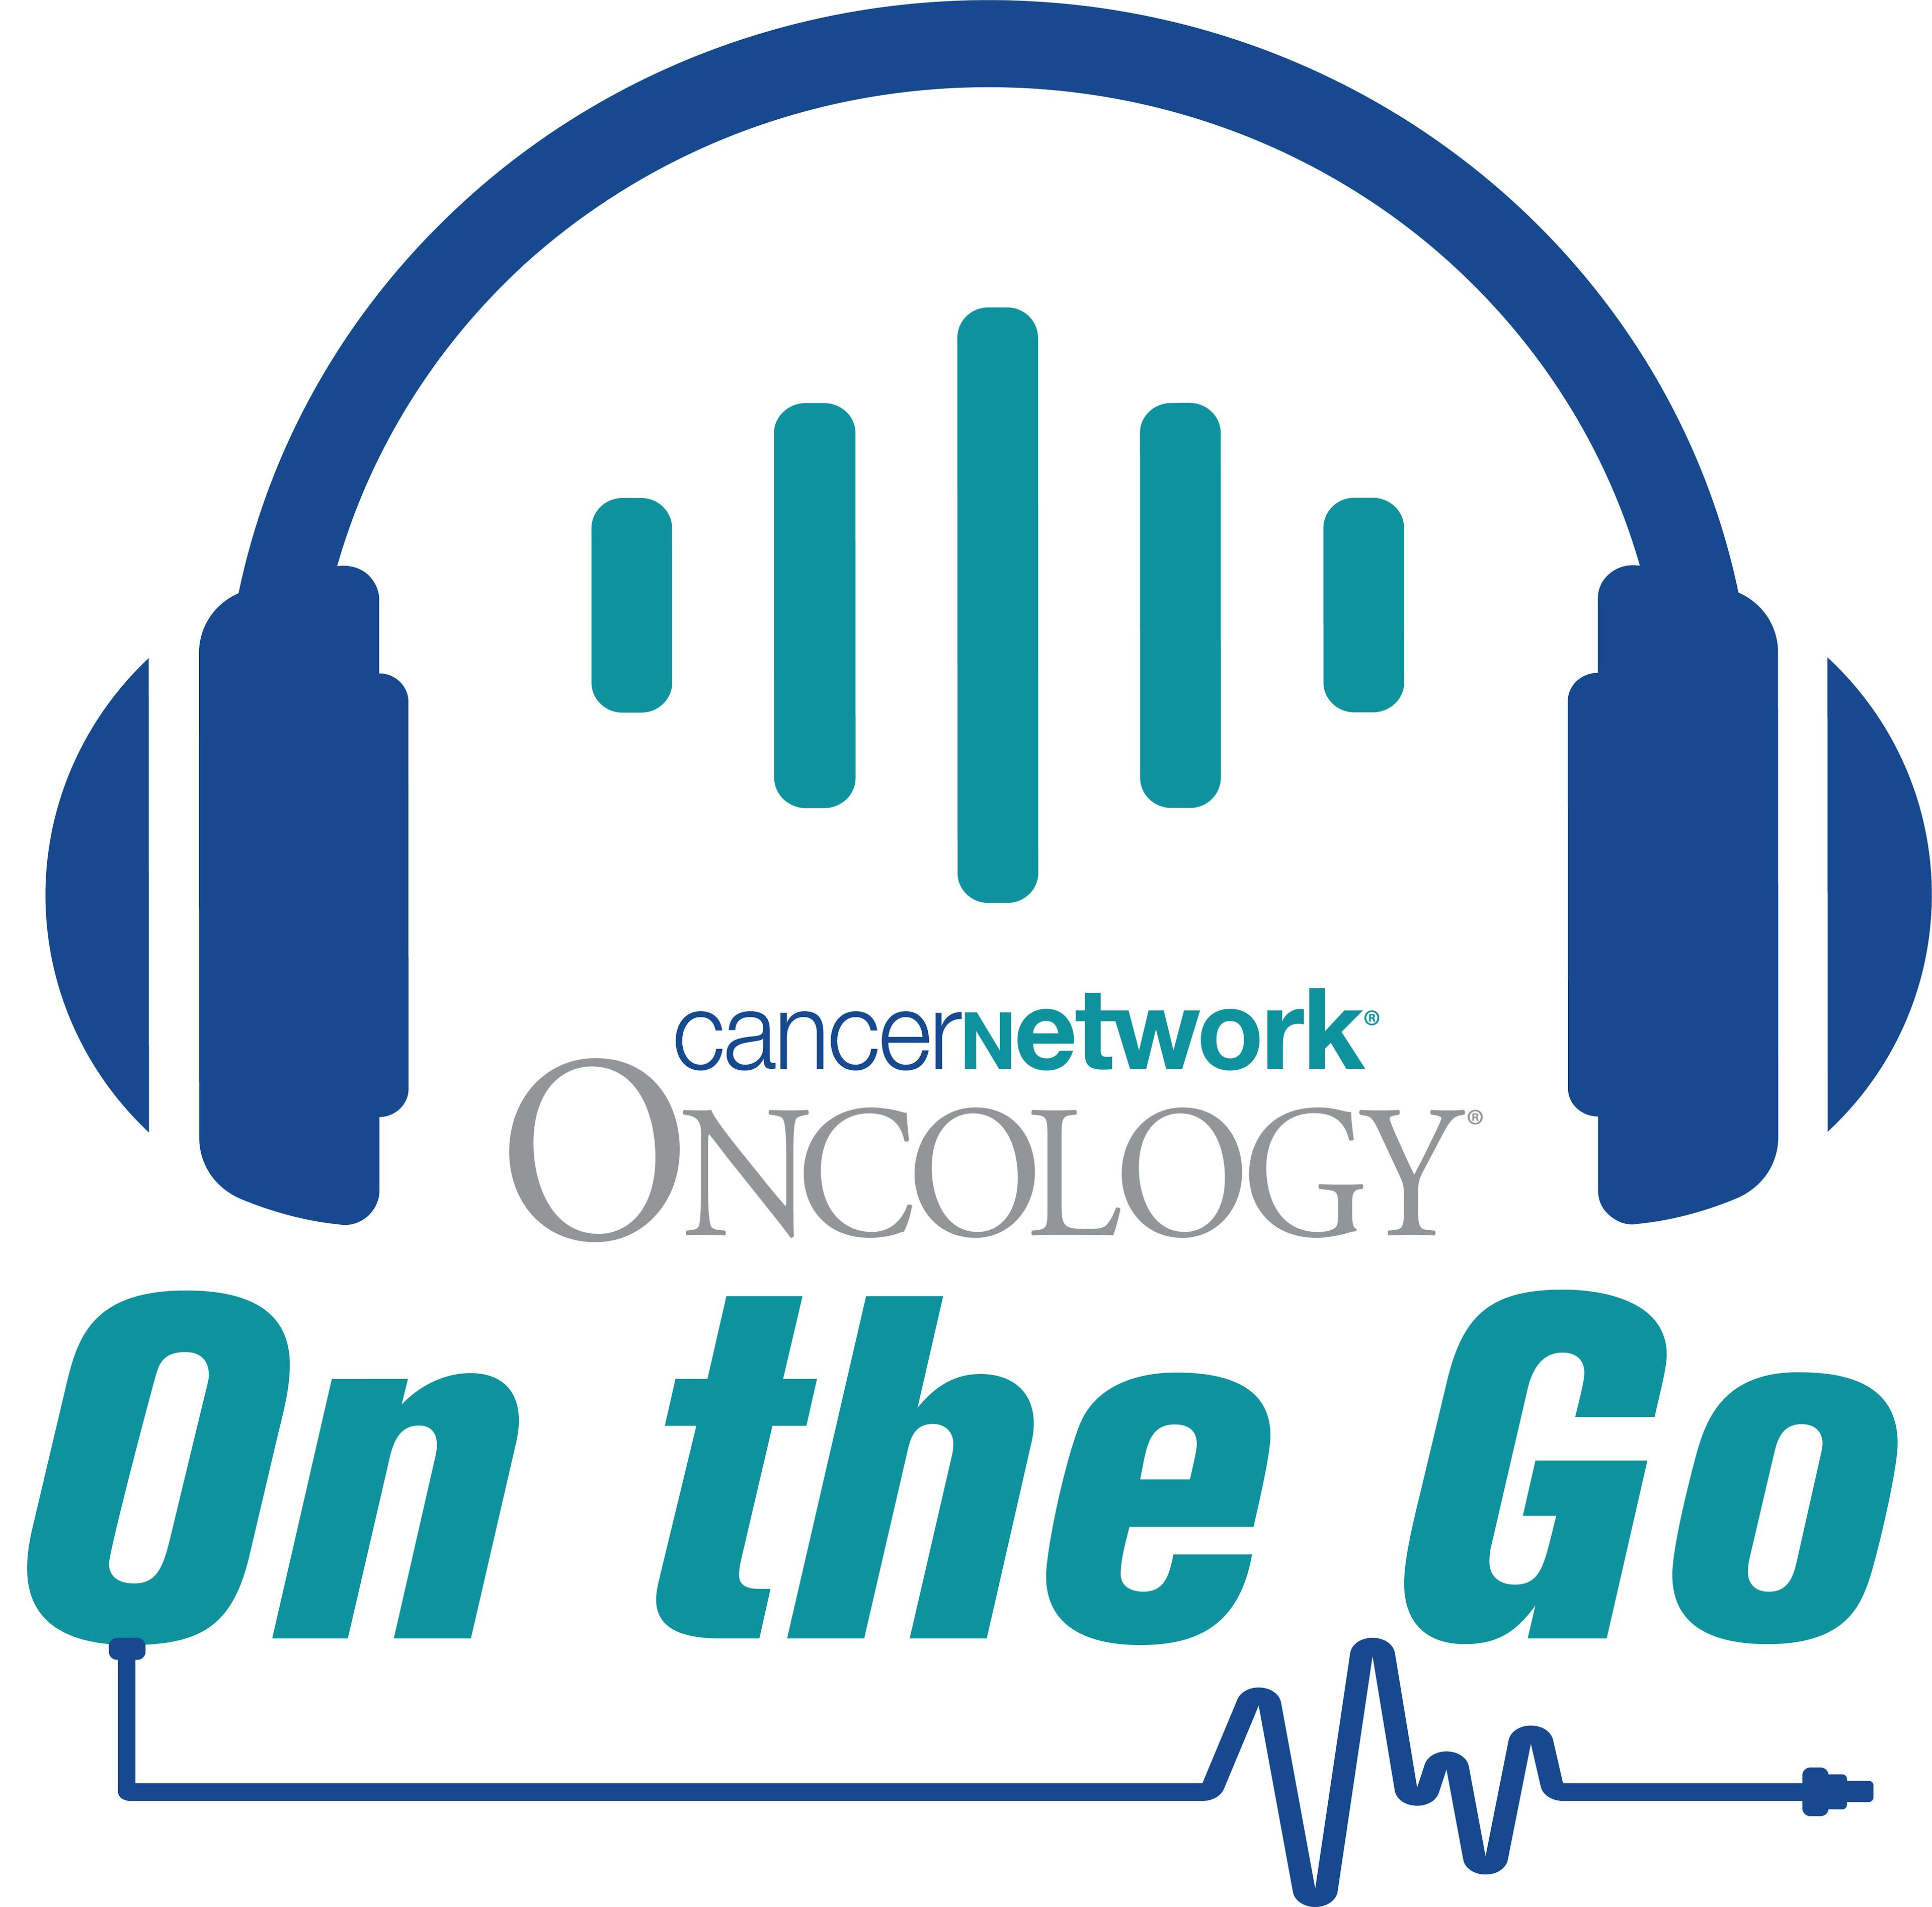 Lisa Carter-Bawa PhD, MPH, APRN, ANP-C, FAAN, discusses how LungTalk, a health communication and decision support tool, may spread awareness and knowledge surrounding lung cancer screening.